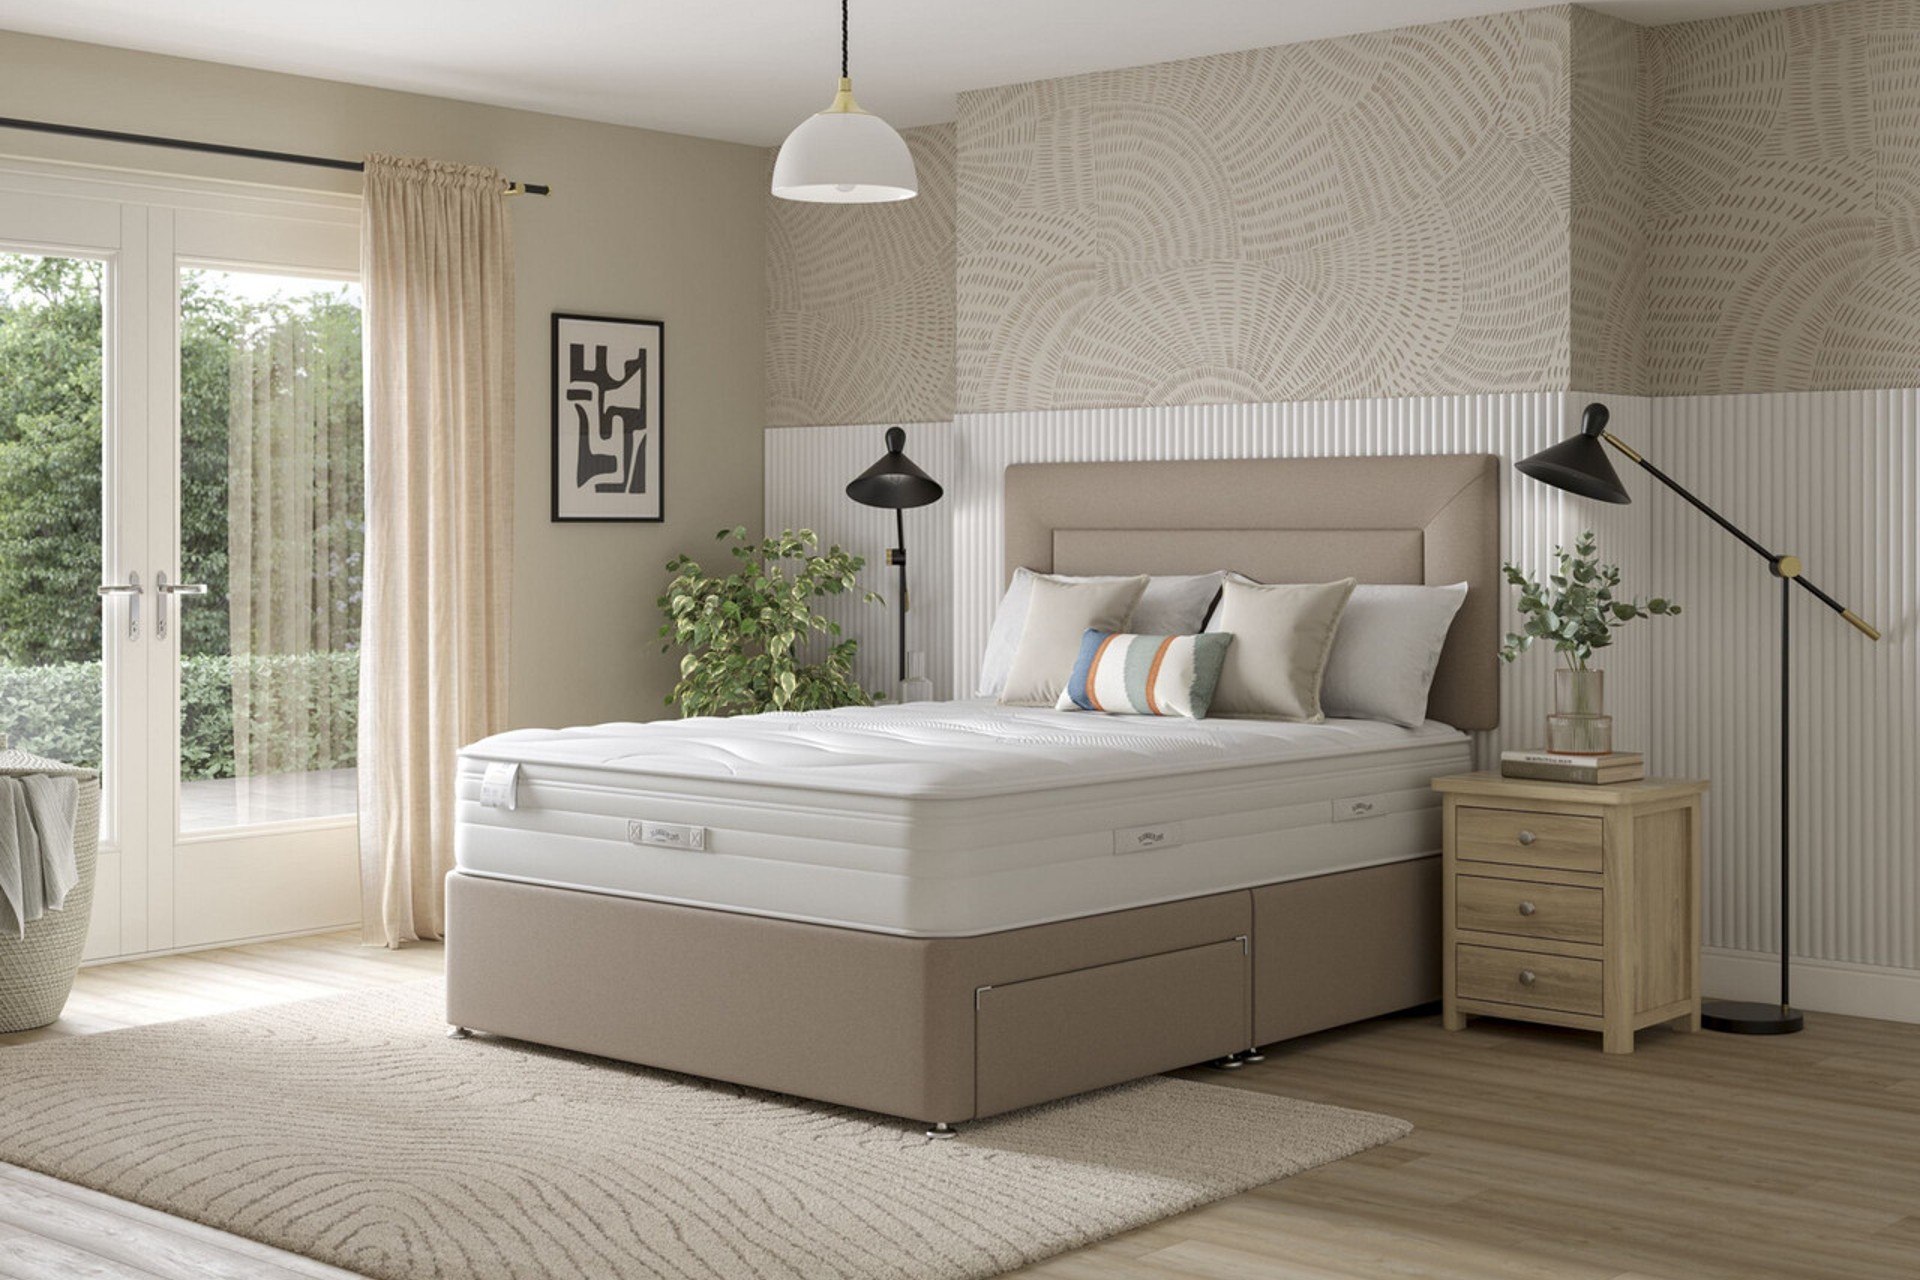 Slumberland Air 3.0 Memory Foam Mattress lifestyle image in a neutral and calming bedroom